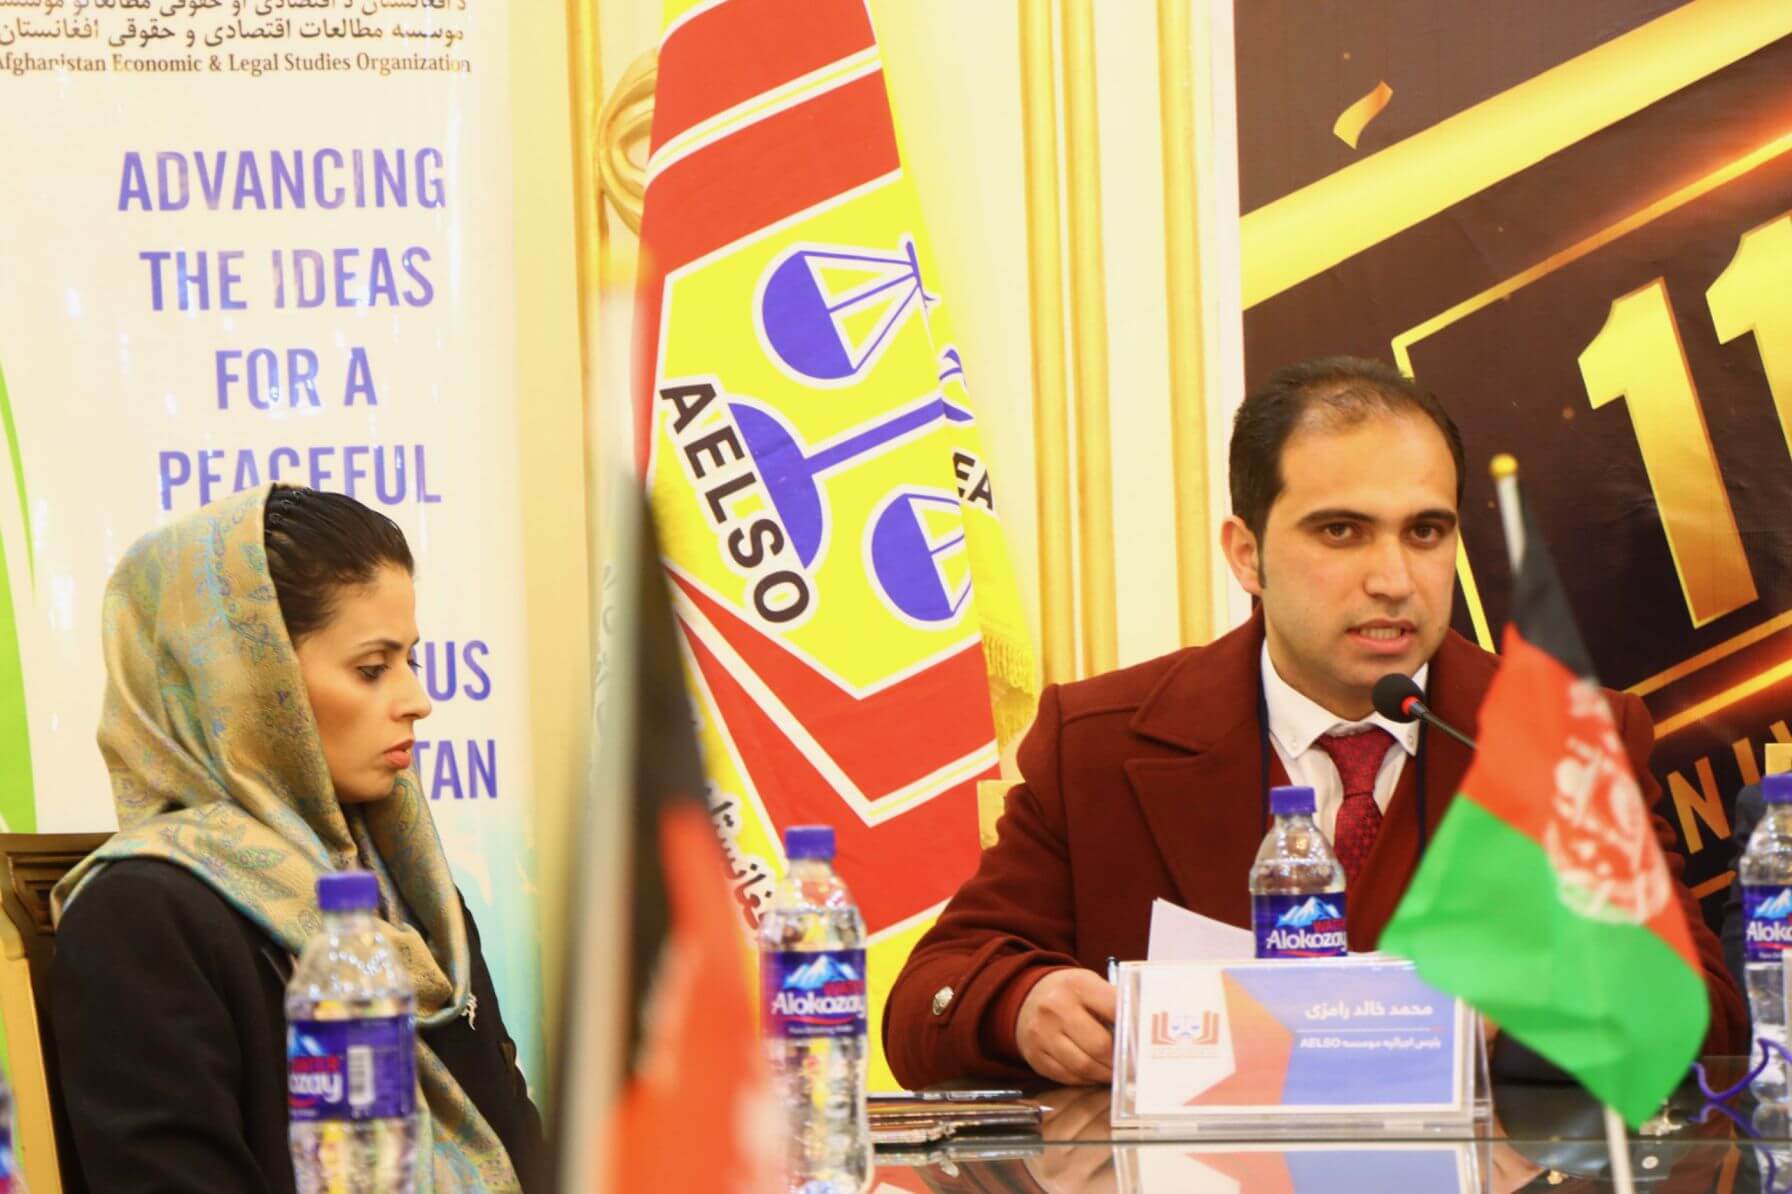 Mr. Ramizy while talking about AELSO's achievements toward promoting human rights values in the country...